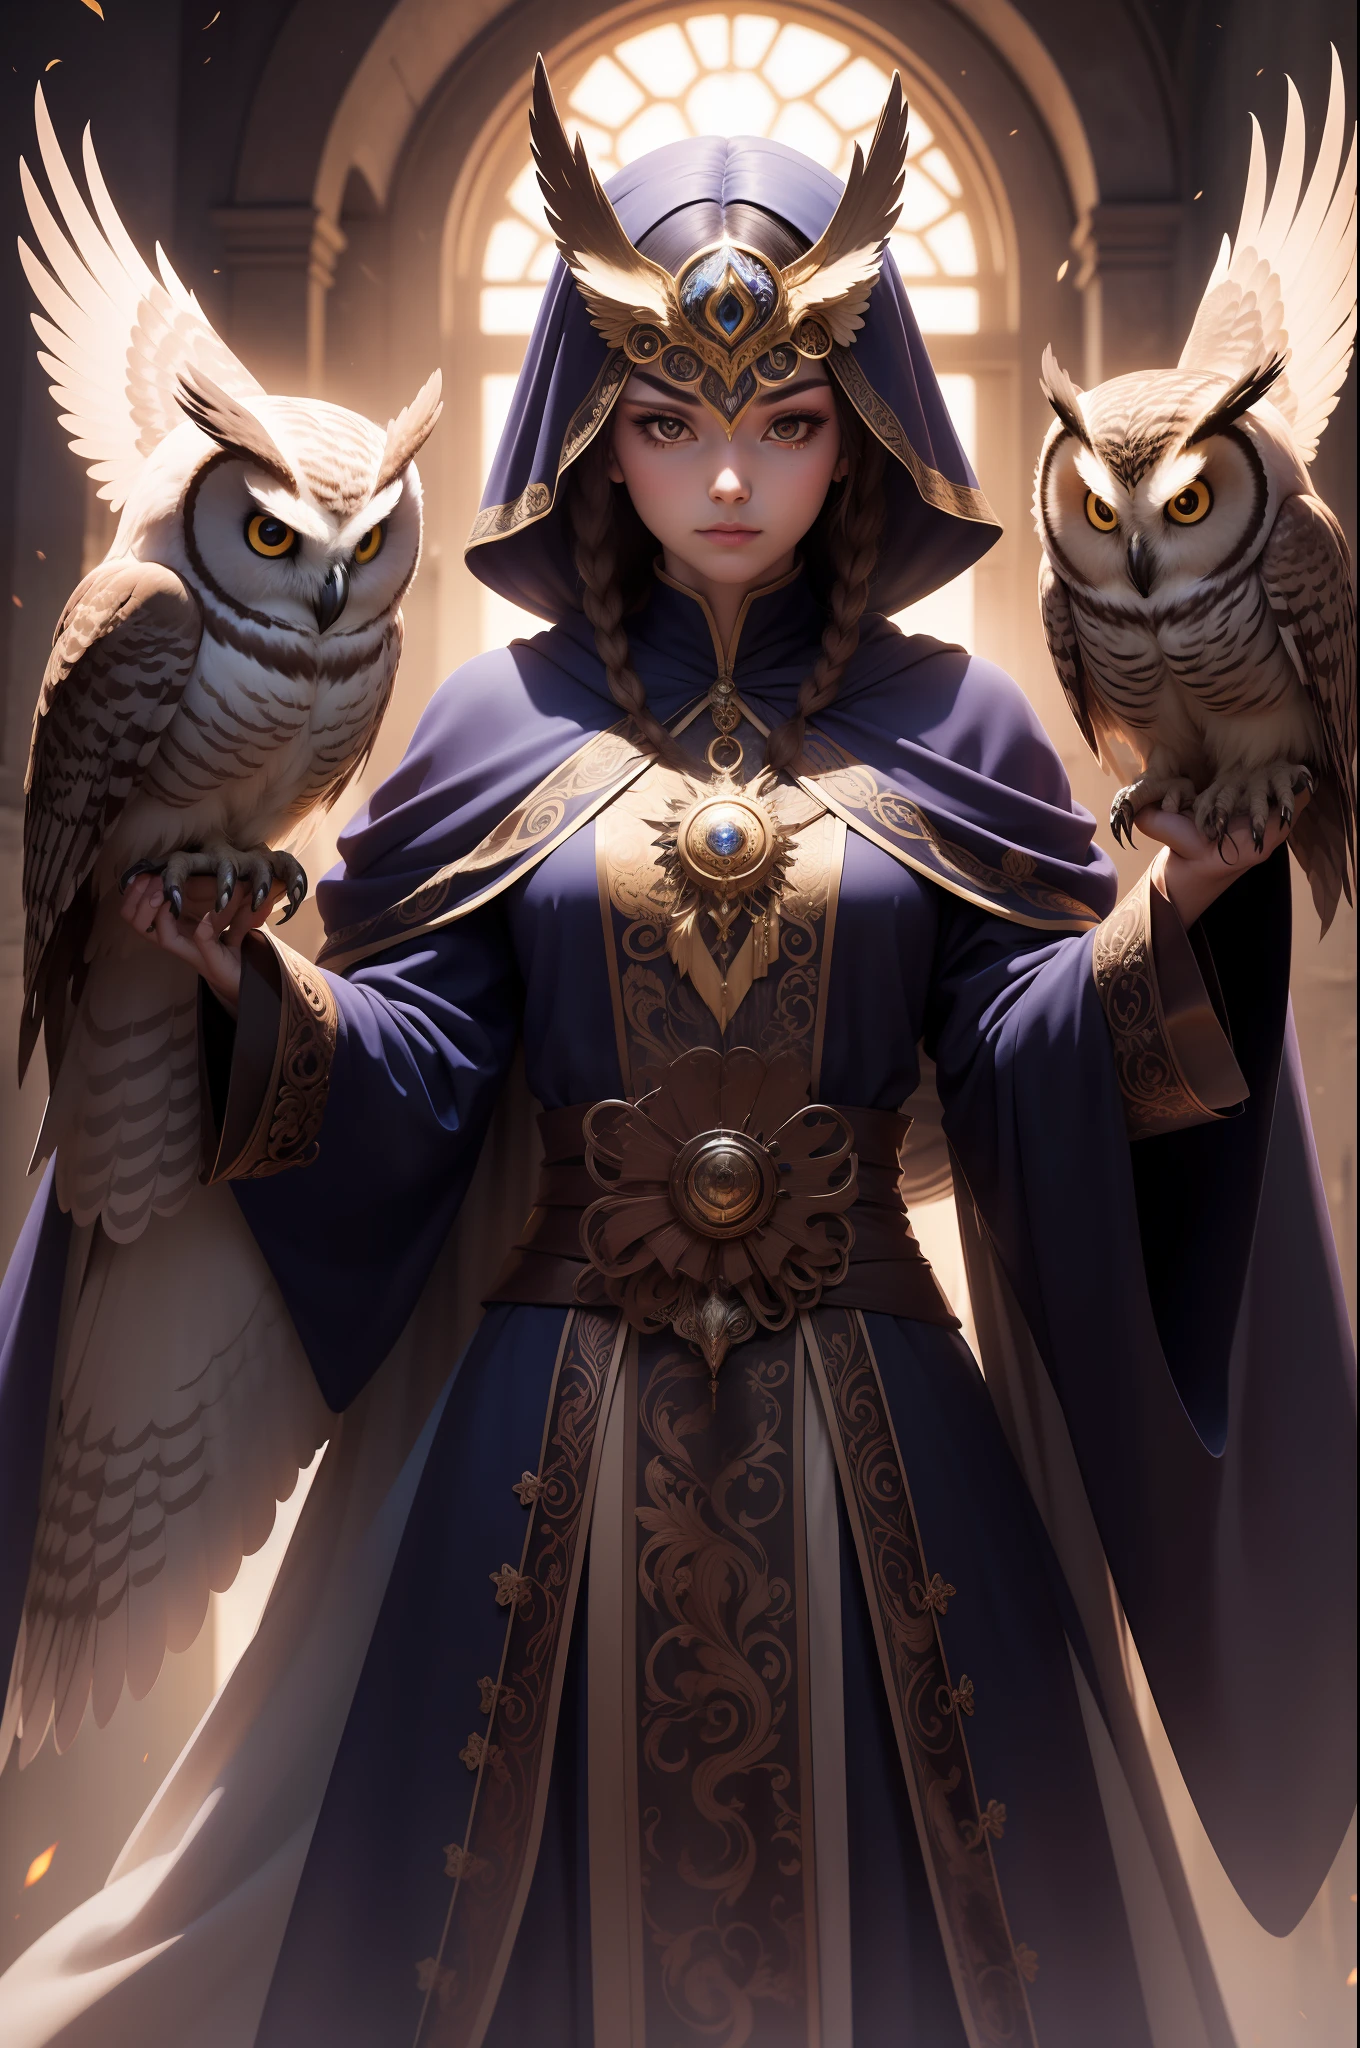 The Owl is a mysterious leader of a legion of spirits, whose identity is passed from person to person. Each title holder takes on a unique appearance, But they all share an enigmatic and supernatural aura. The central figure wears an ornamental mask that reflects the piercing eyes of an owl, symbolizing wisdom and mystery. Their dark, flowing costumes hark back to the ethereal nature of their spiritual powers.